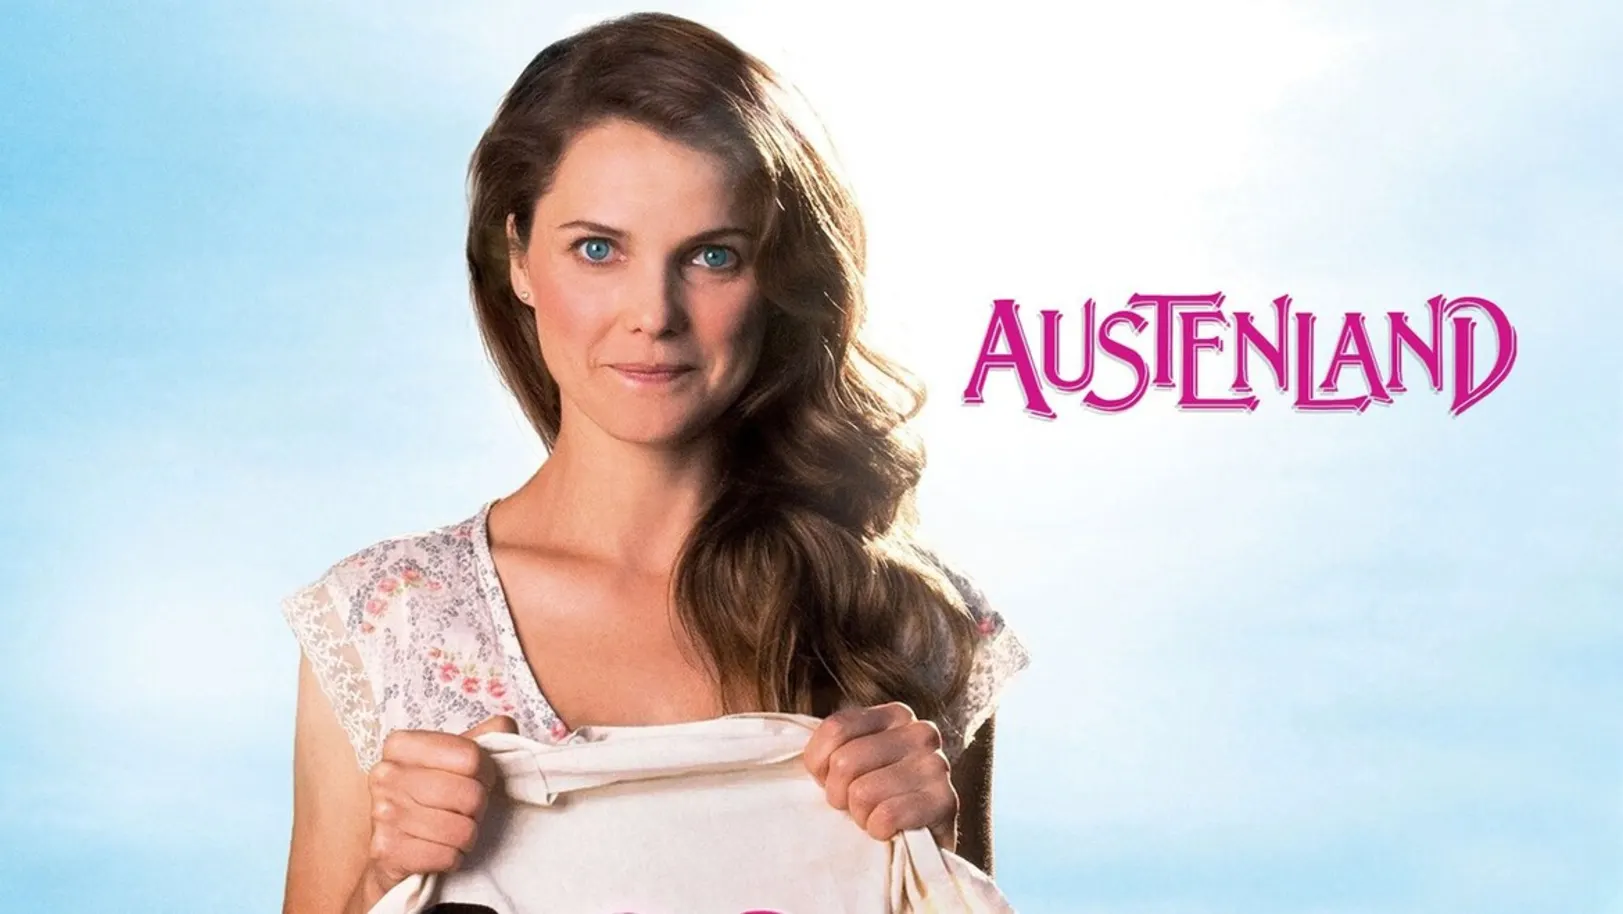 Austenland Streaming Now On &Prive HD